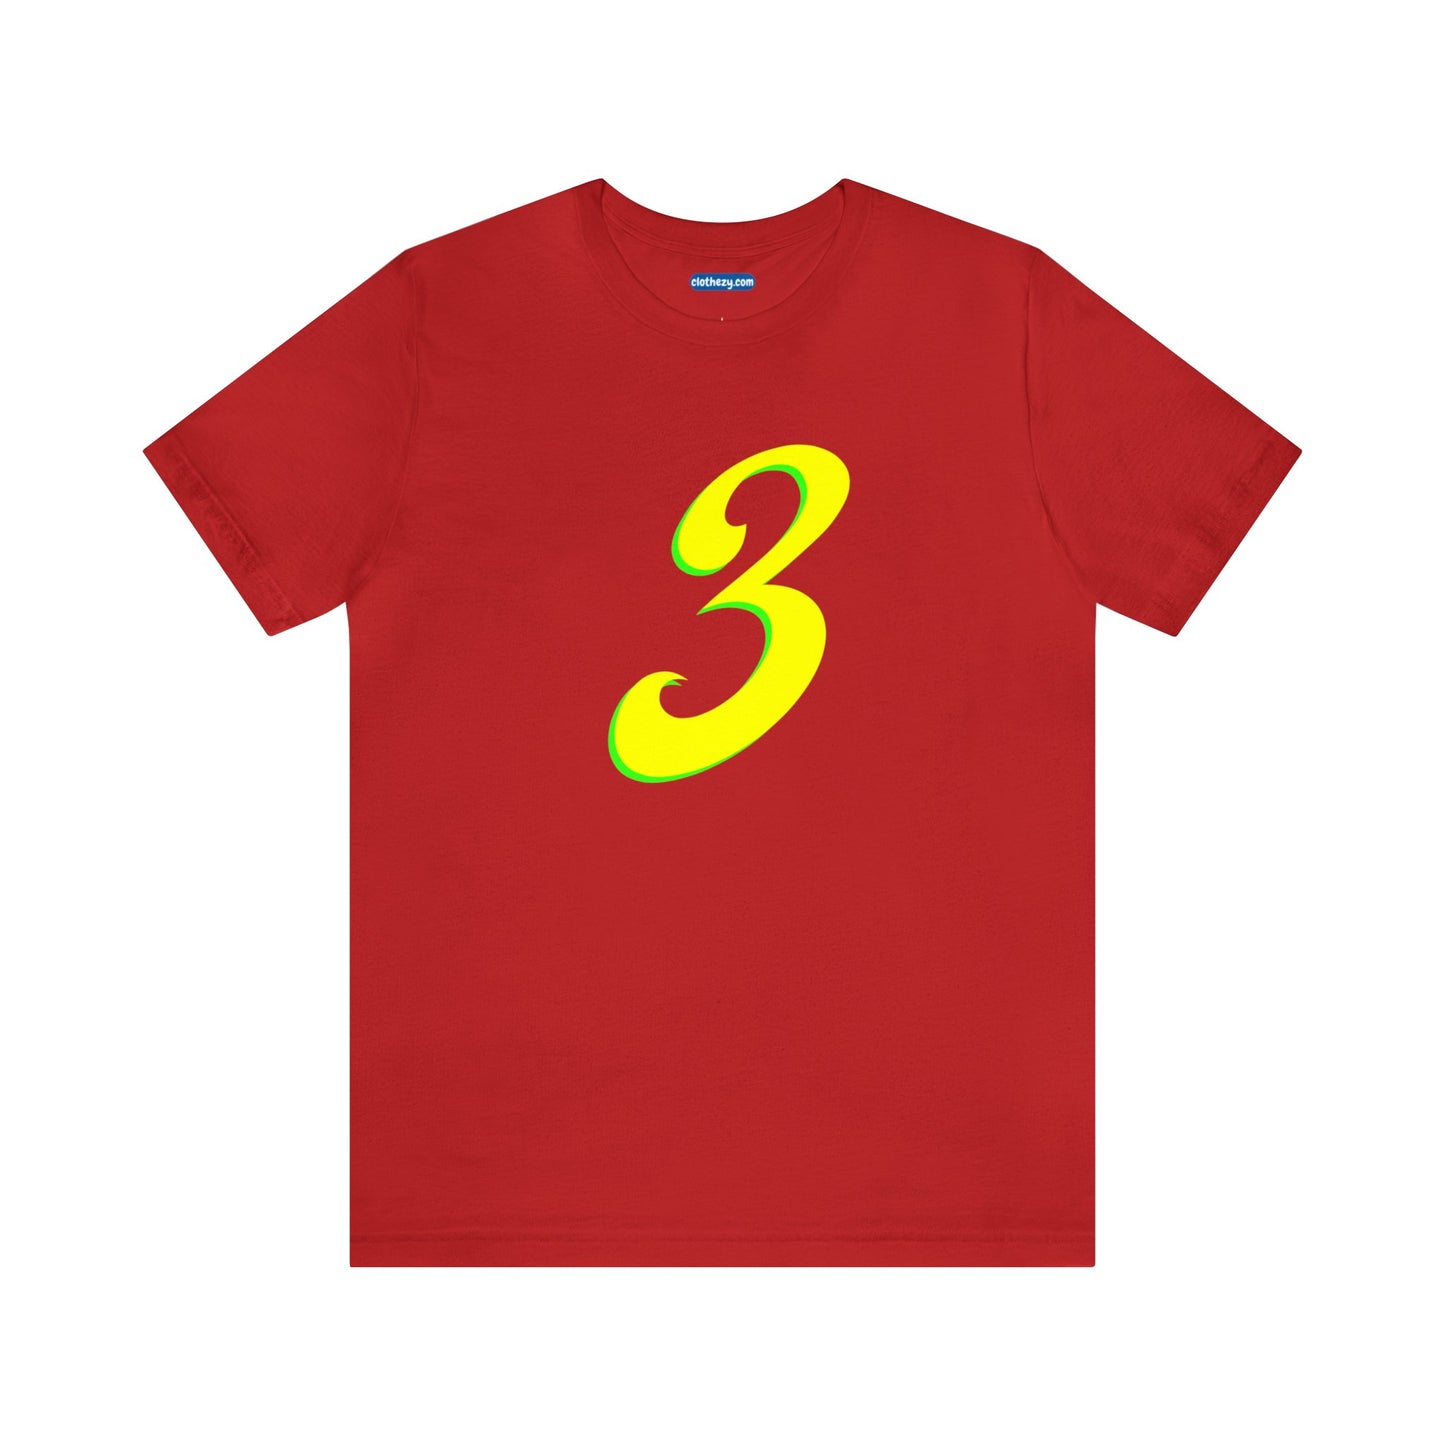 Number 3 Design - Soft Cotton Tee for birthdays and celebrations, Gift for friends and family, Multiple Options by clothezy.com in Red Size Small - Buy Now